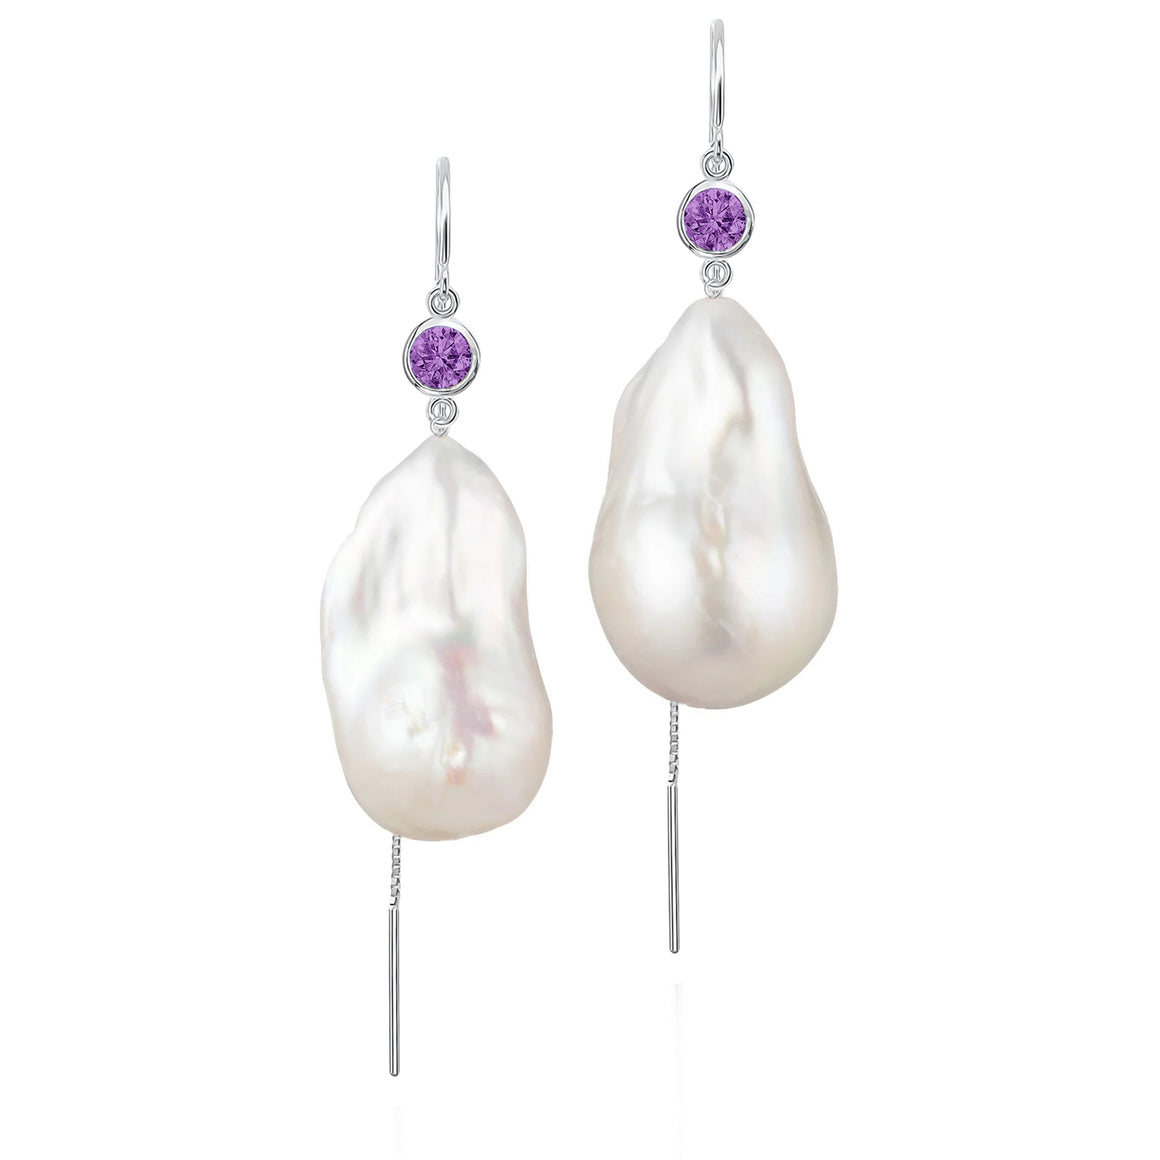 Amethyst And Large Baroque Freshwater Pearl Drop Threader Earrings In 14K White Gold | Sterling Silver